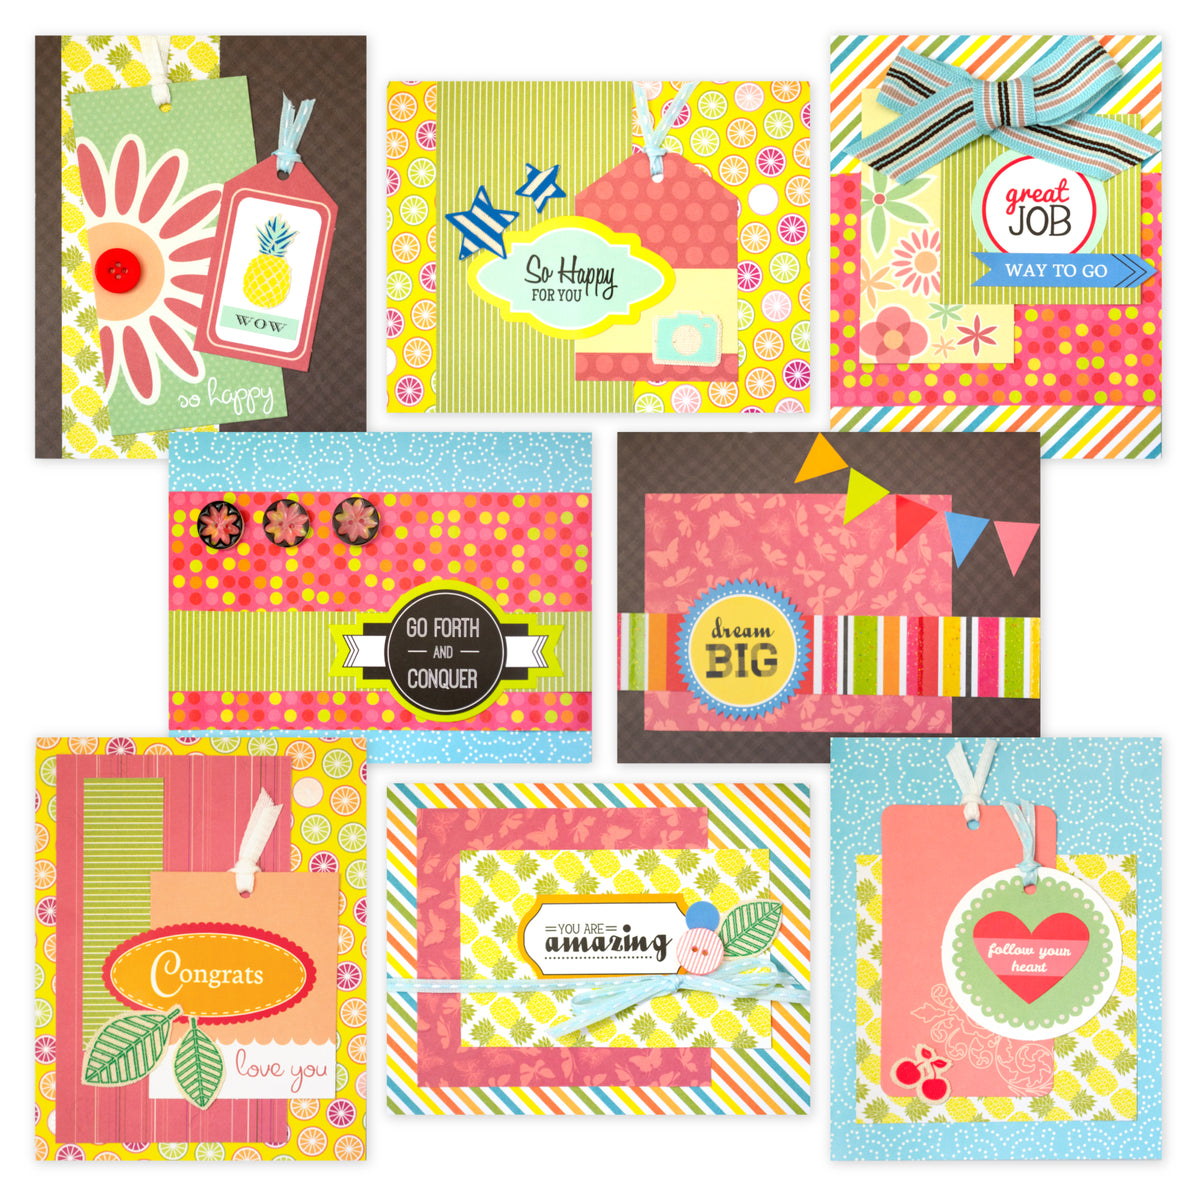 3-6165 Celebration Time Limited Edition Card Kit - Instructions and  Materials to Make 8 Cards